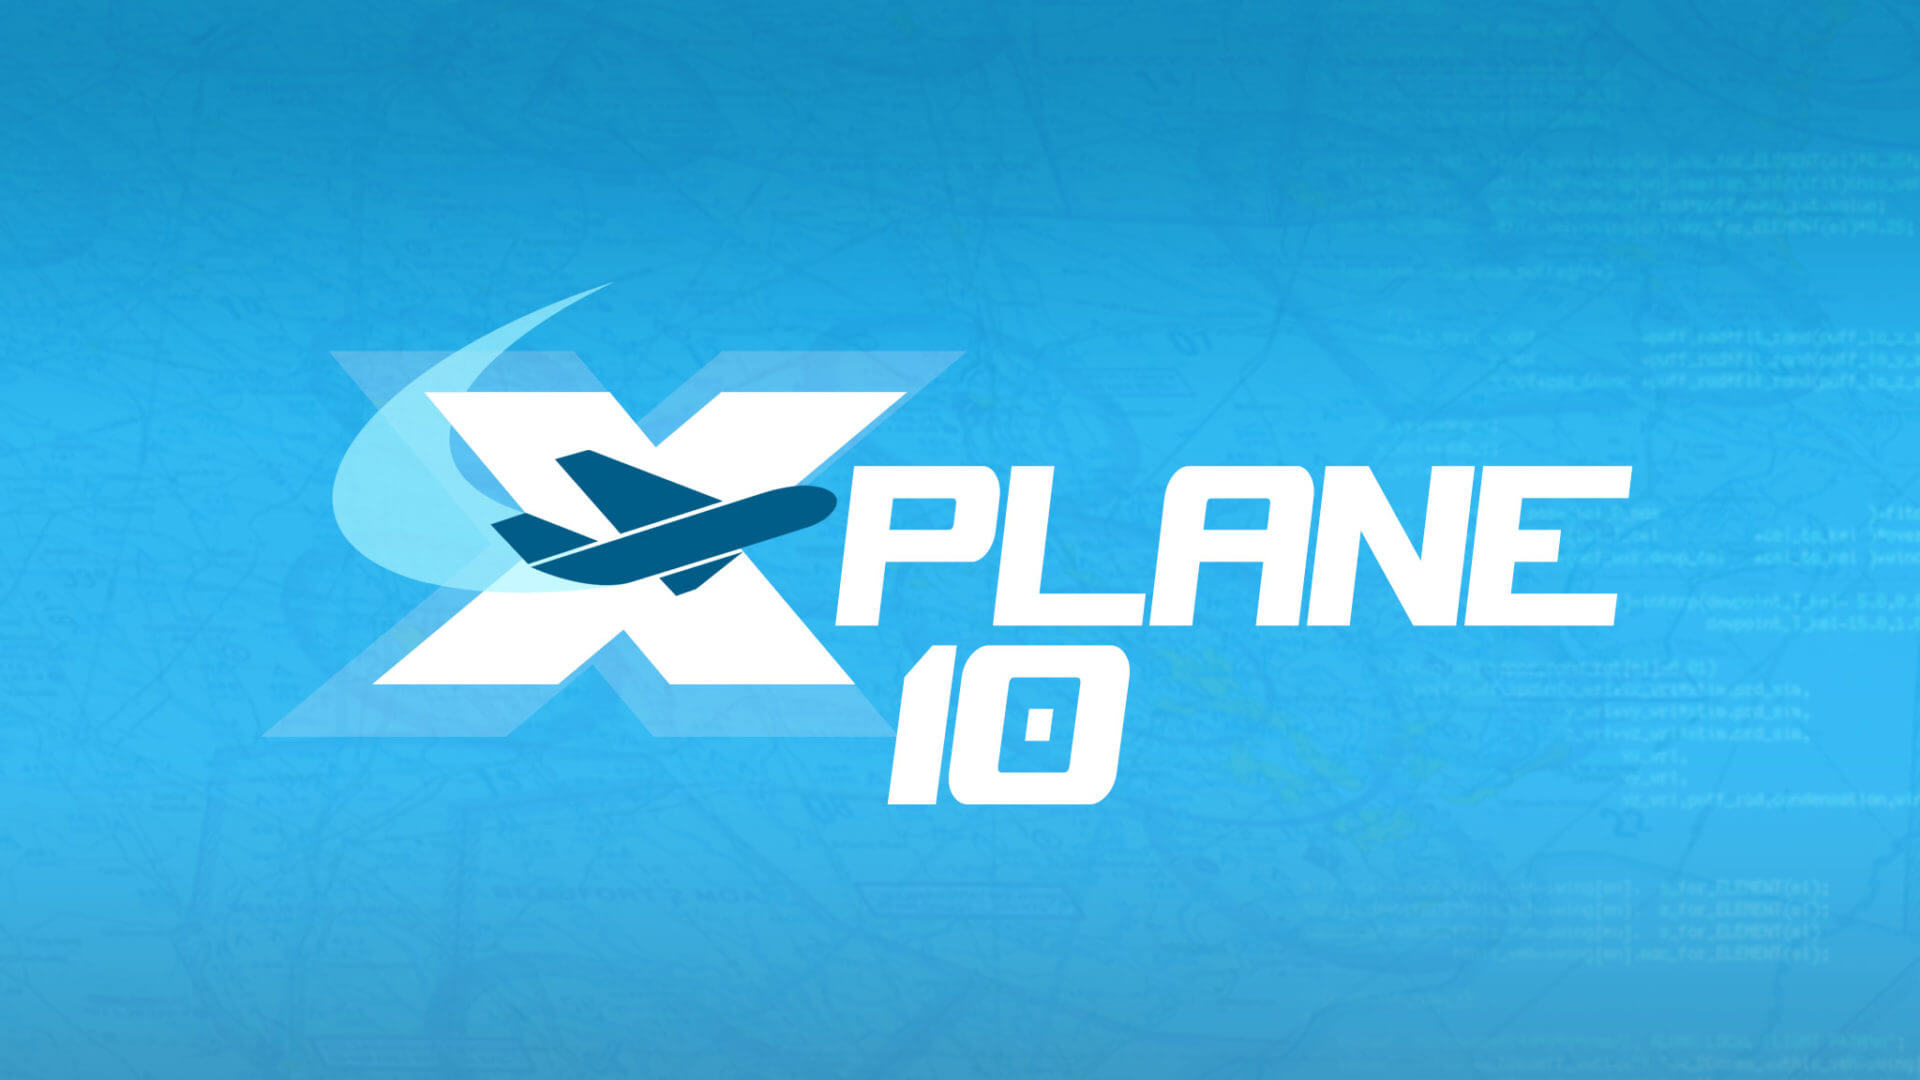 X Plane 10 Mobile flight sim app for iPhone iPad Android 1920x1080